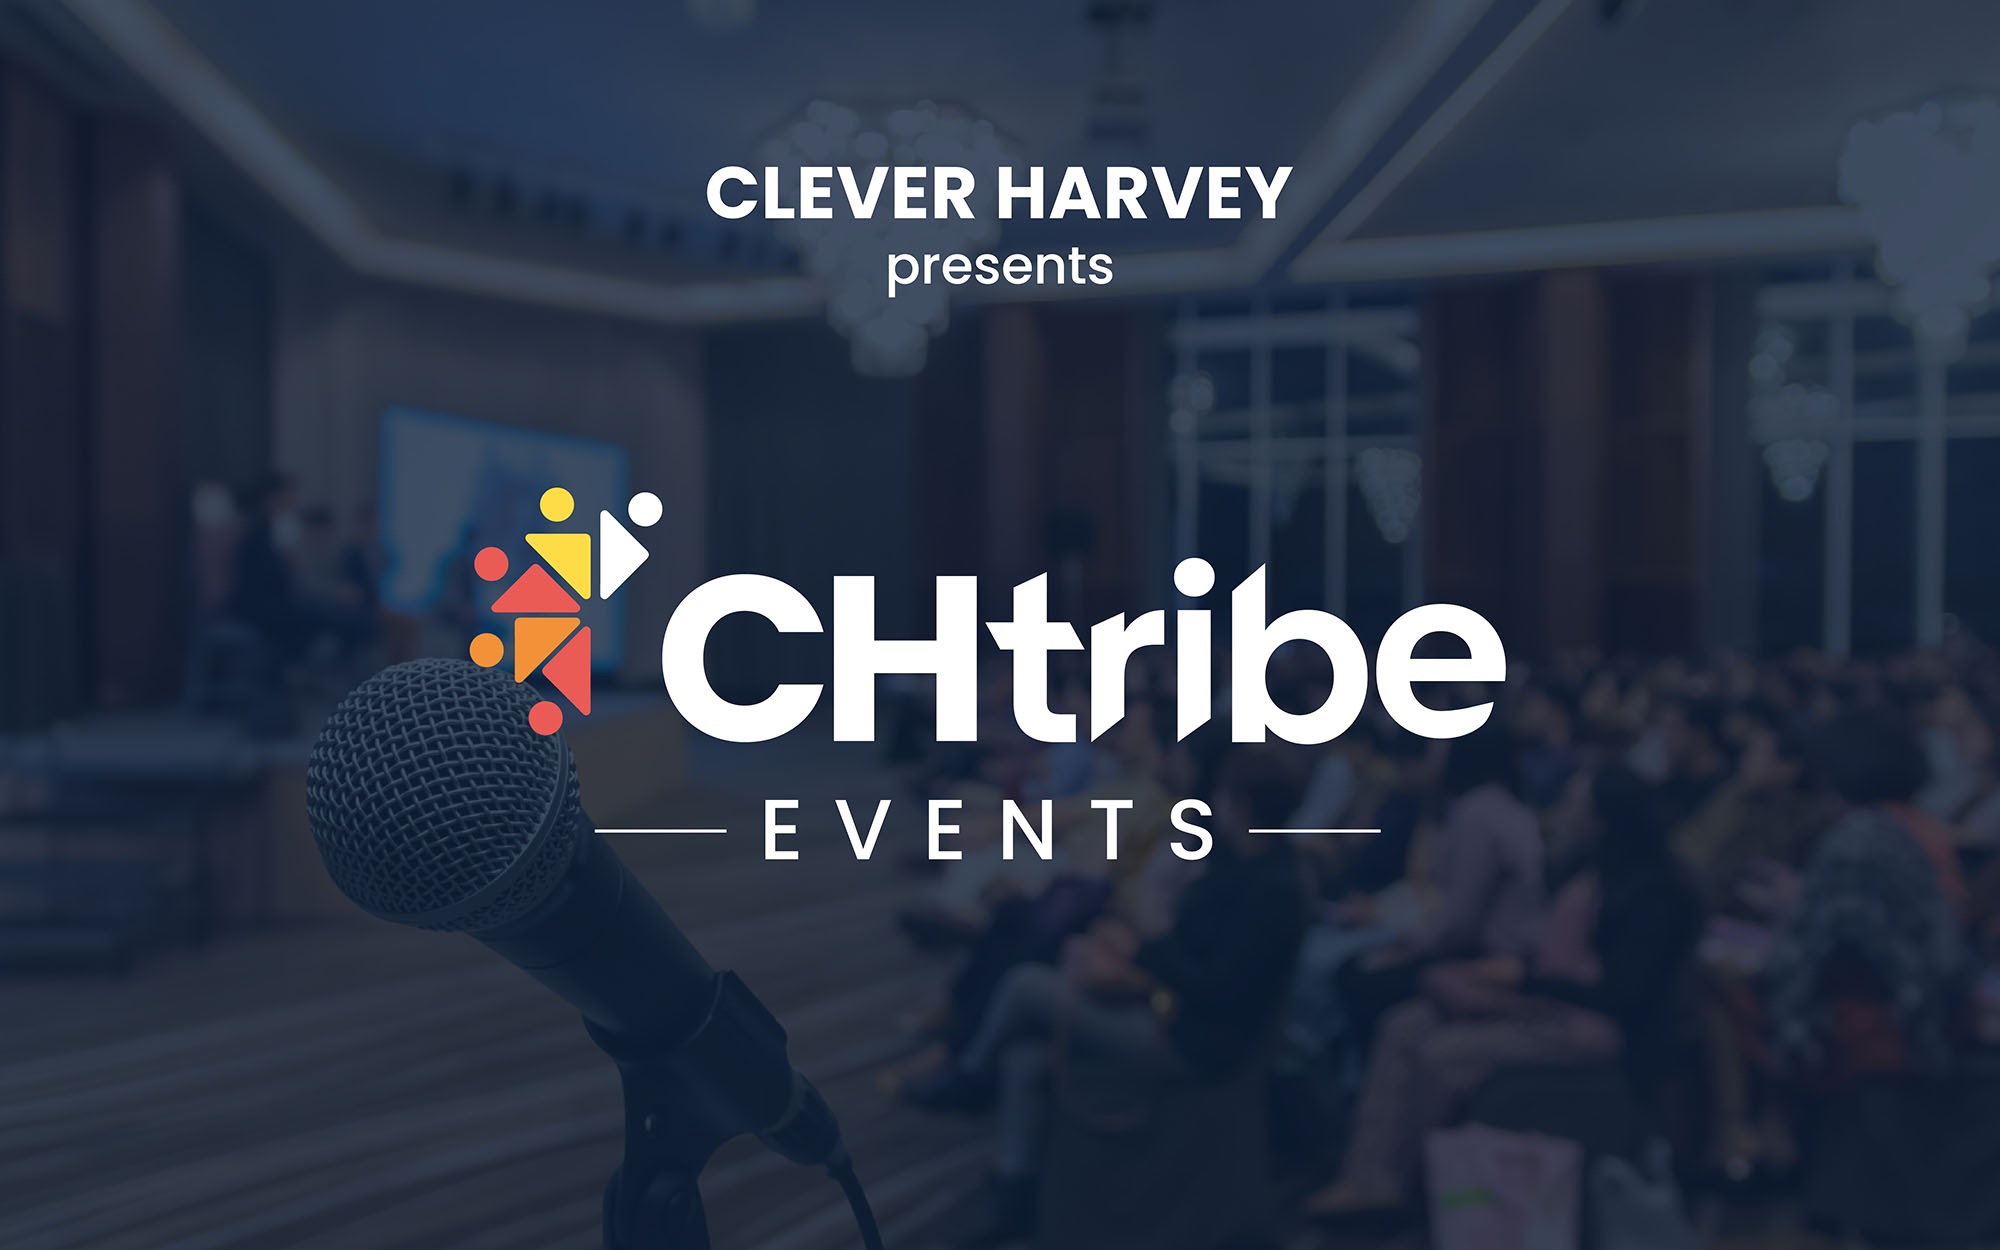 Ch tribe events